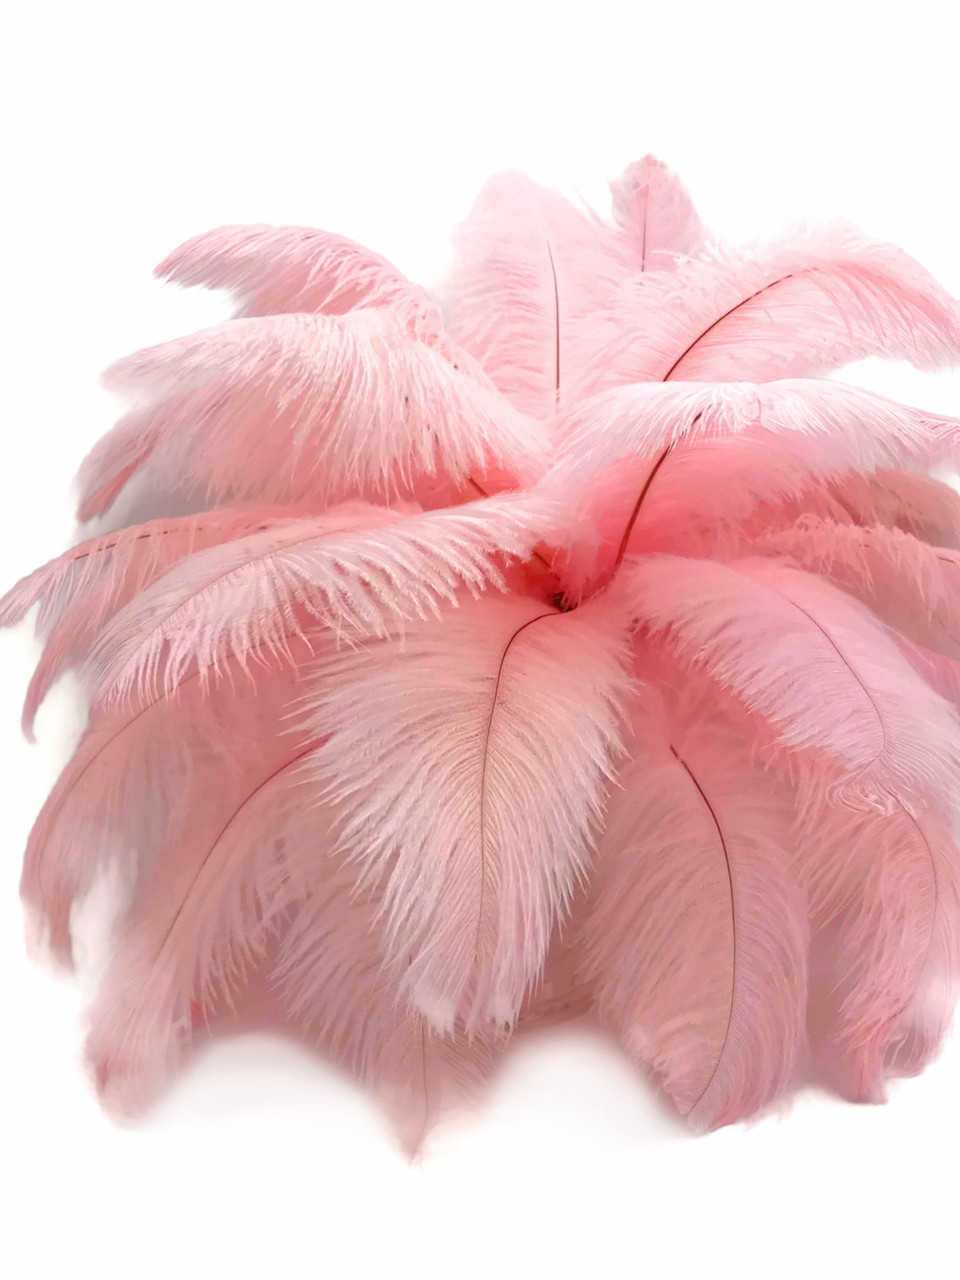 18-20 inches Blush Pink Ostrich Feather Large Male Ostrich Plume Feathers  50pcs Popular color!!!